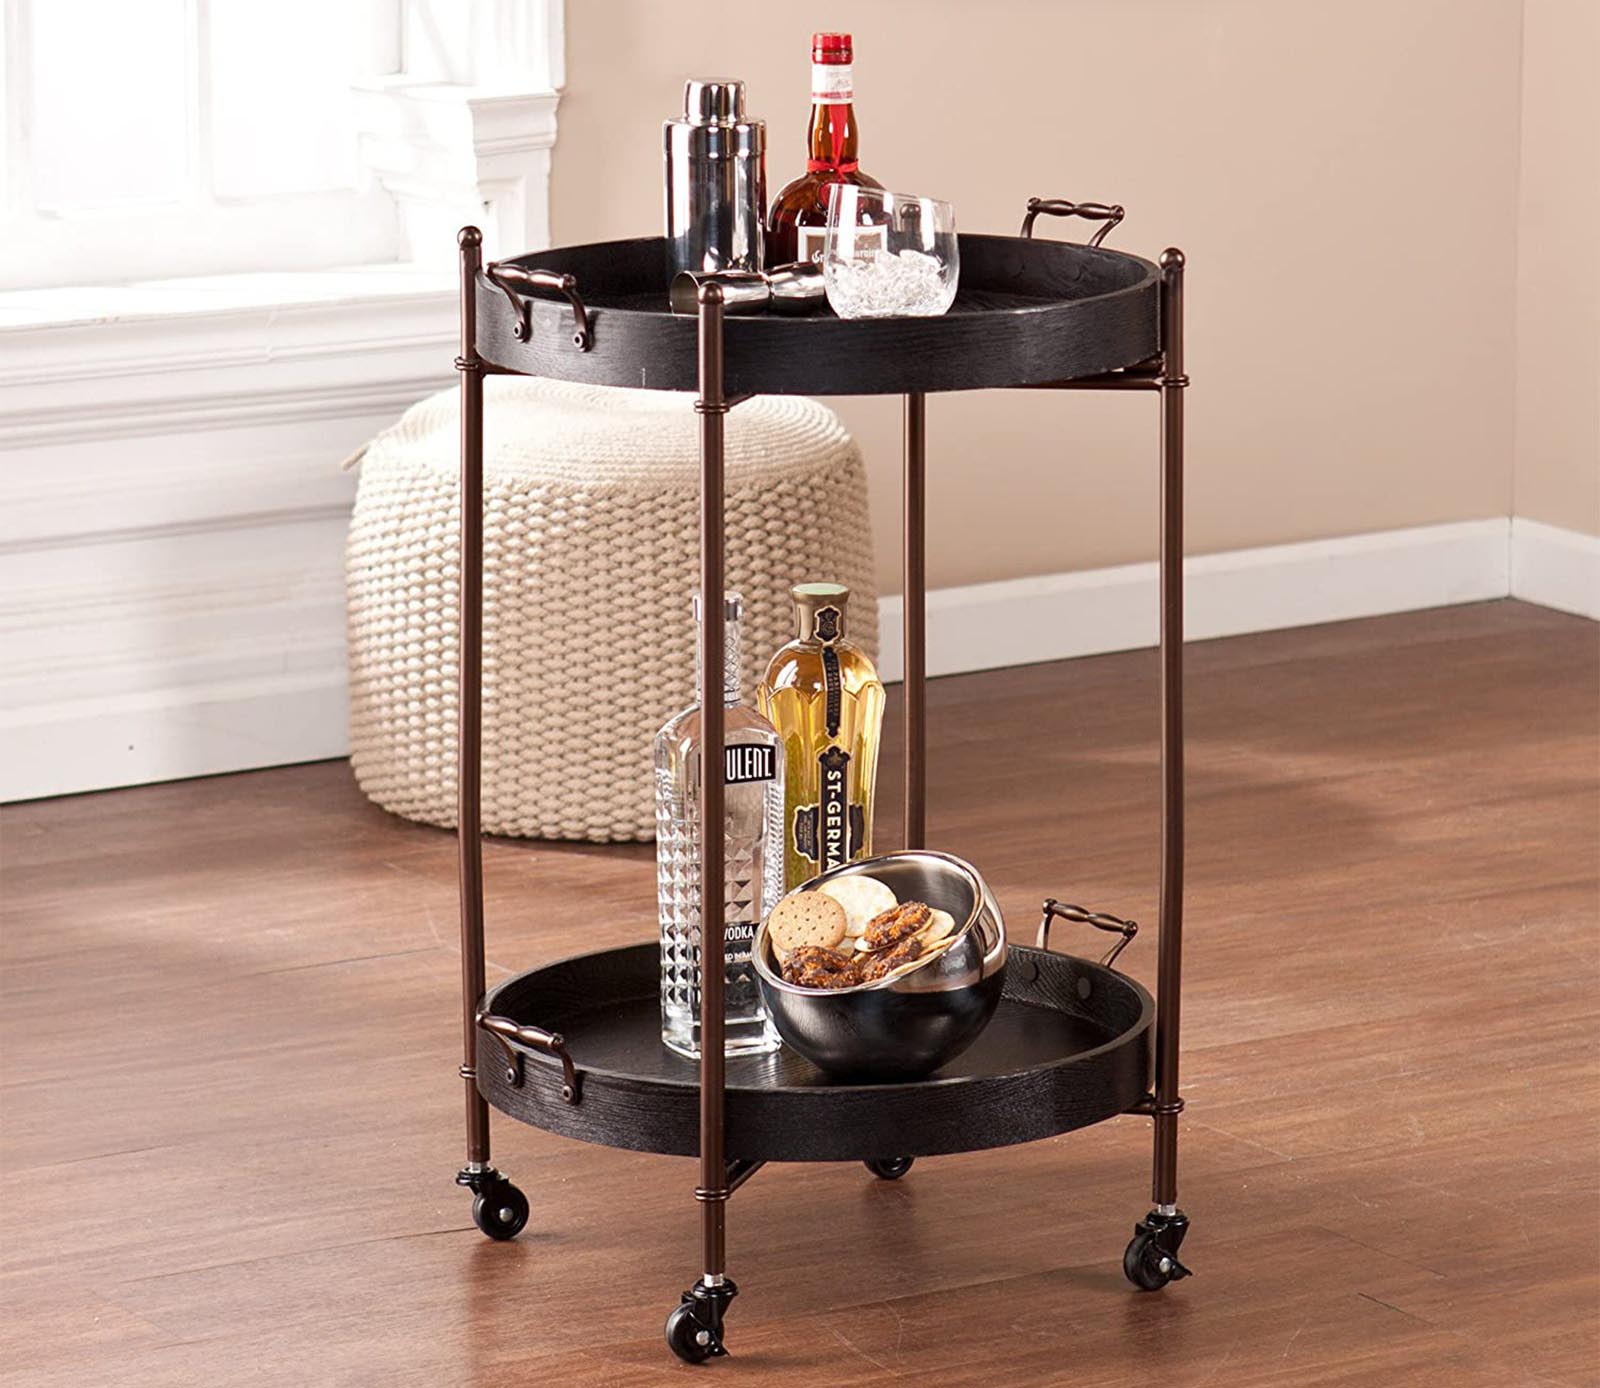 Pieces of Furniture That Will Make Any Room Feel Bigger Option Rolling Bar Cart